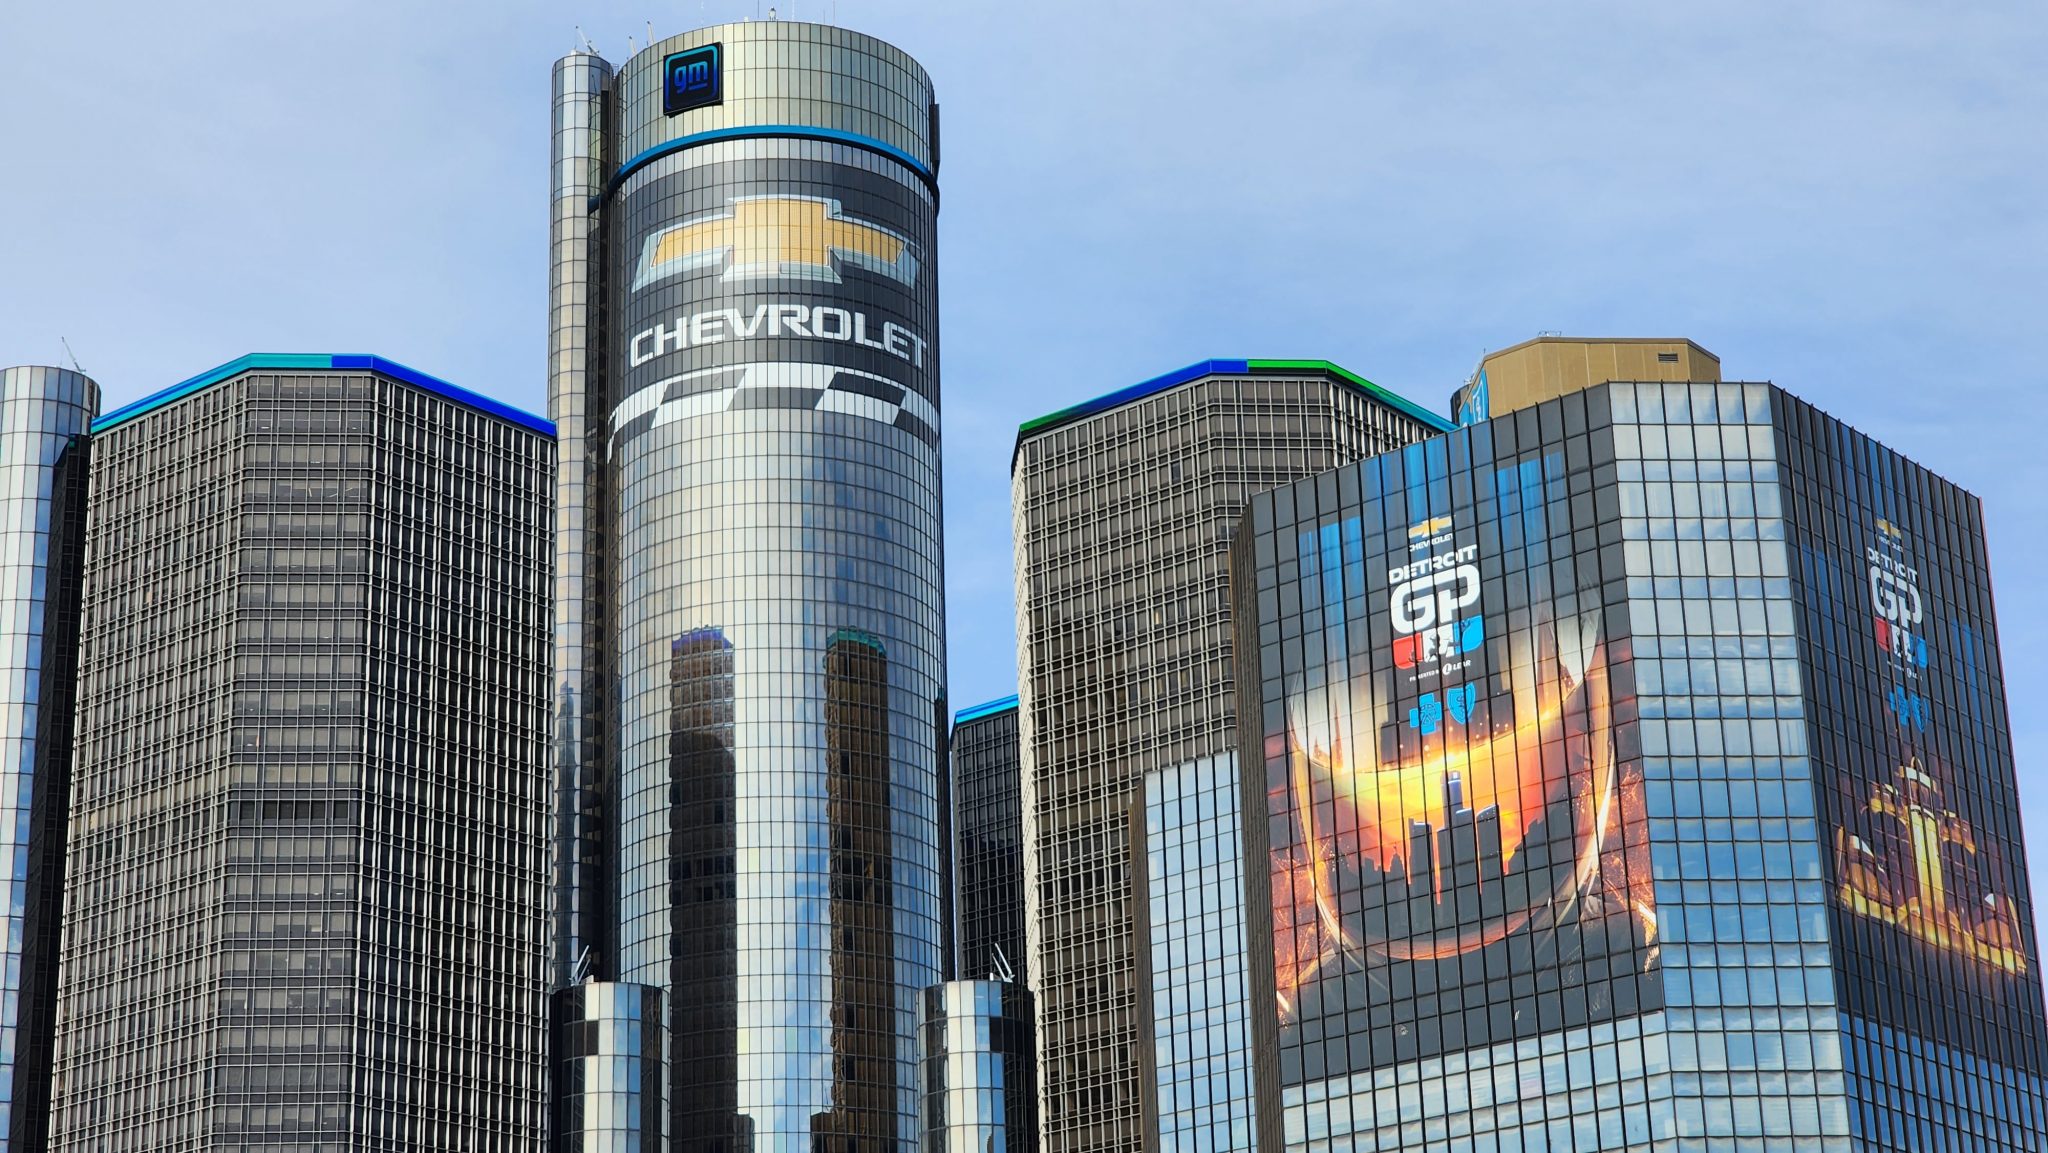 The Renaissance Center stands decorated for the 2023 Detroit Grand Prix.